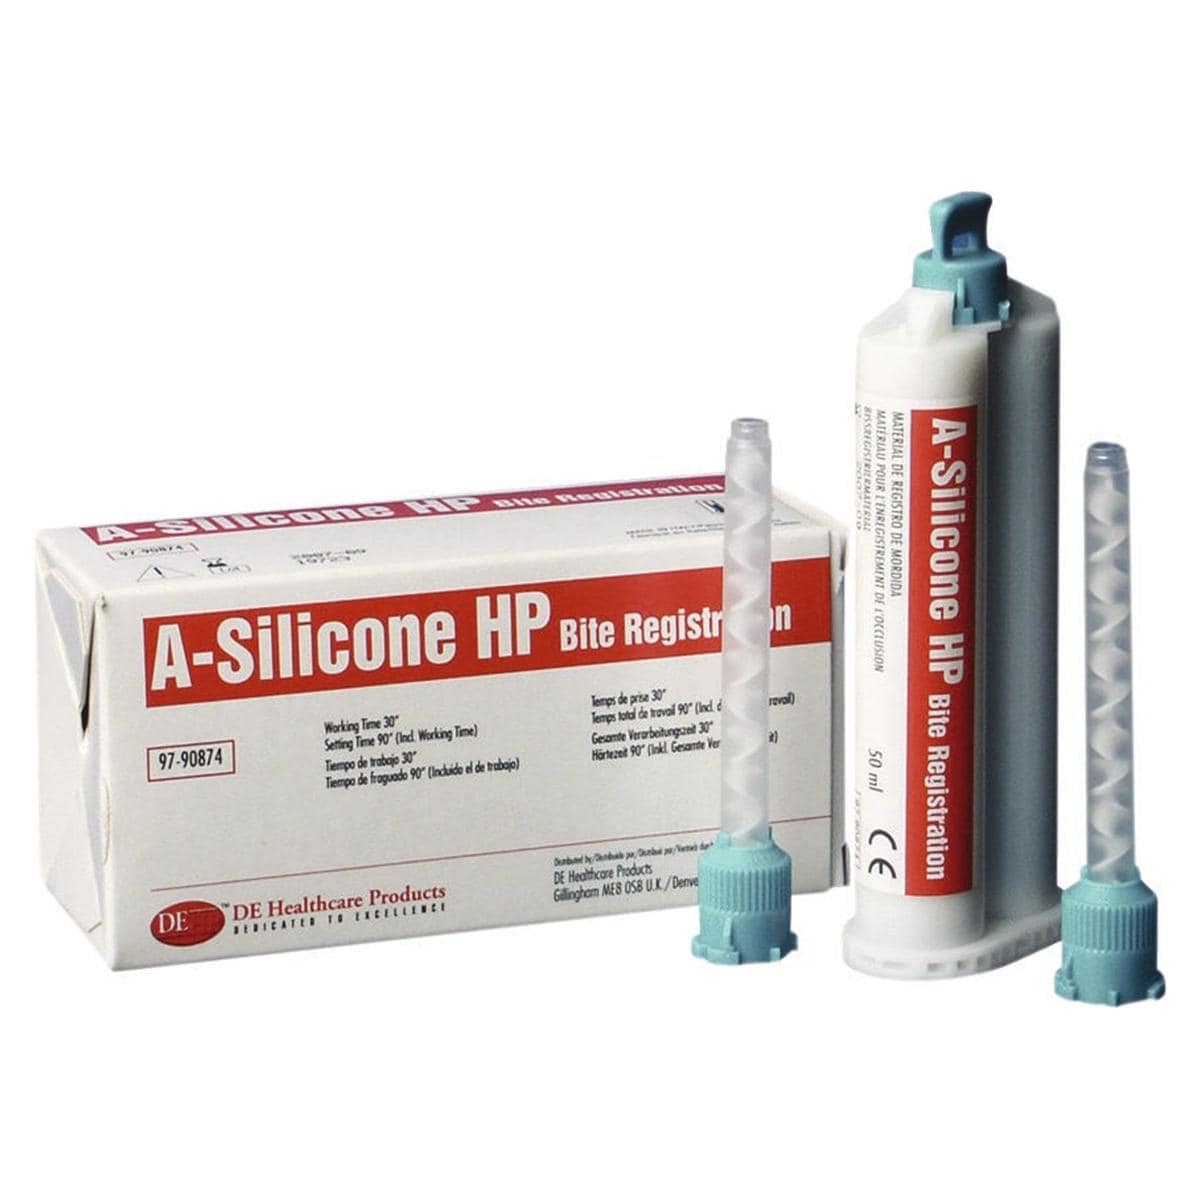 A-Silicone Bite Registration - Verpakking, 2x 50 ml